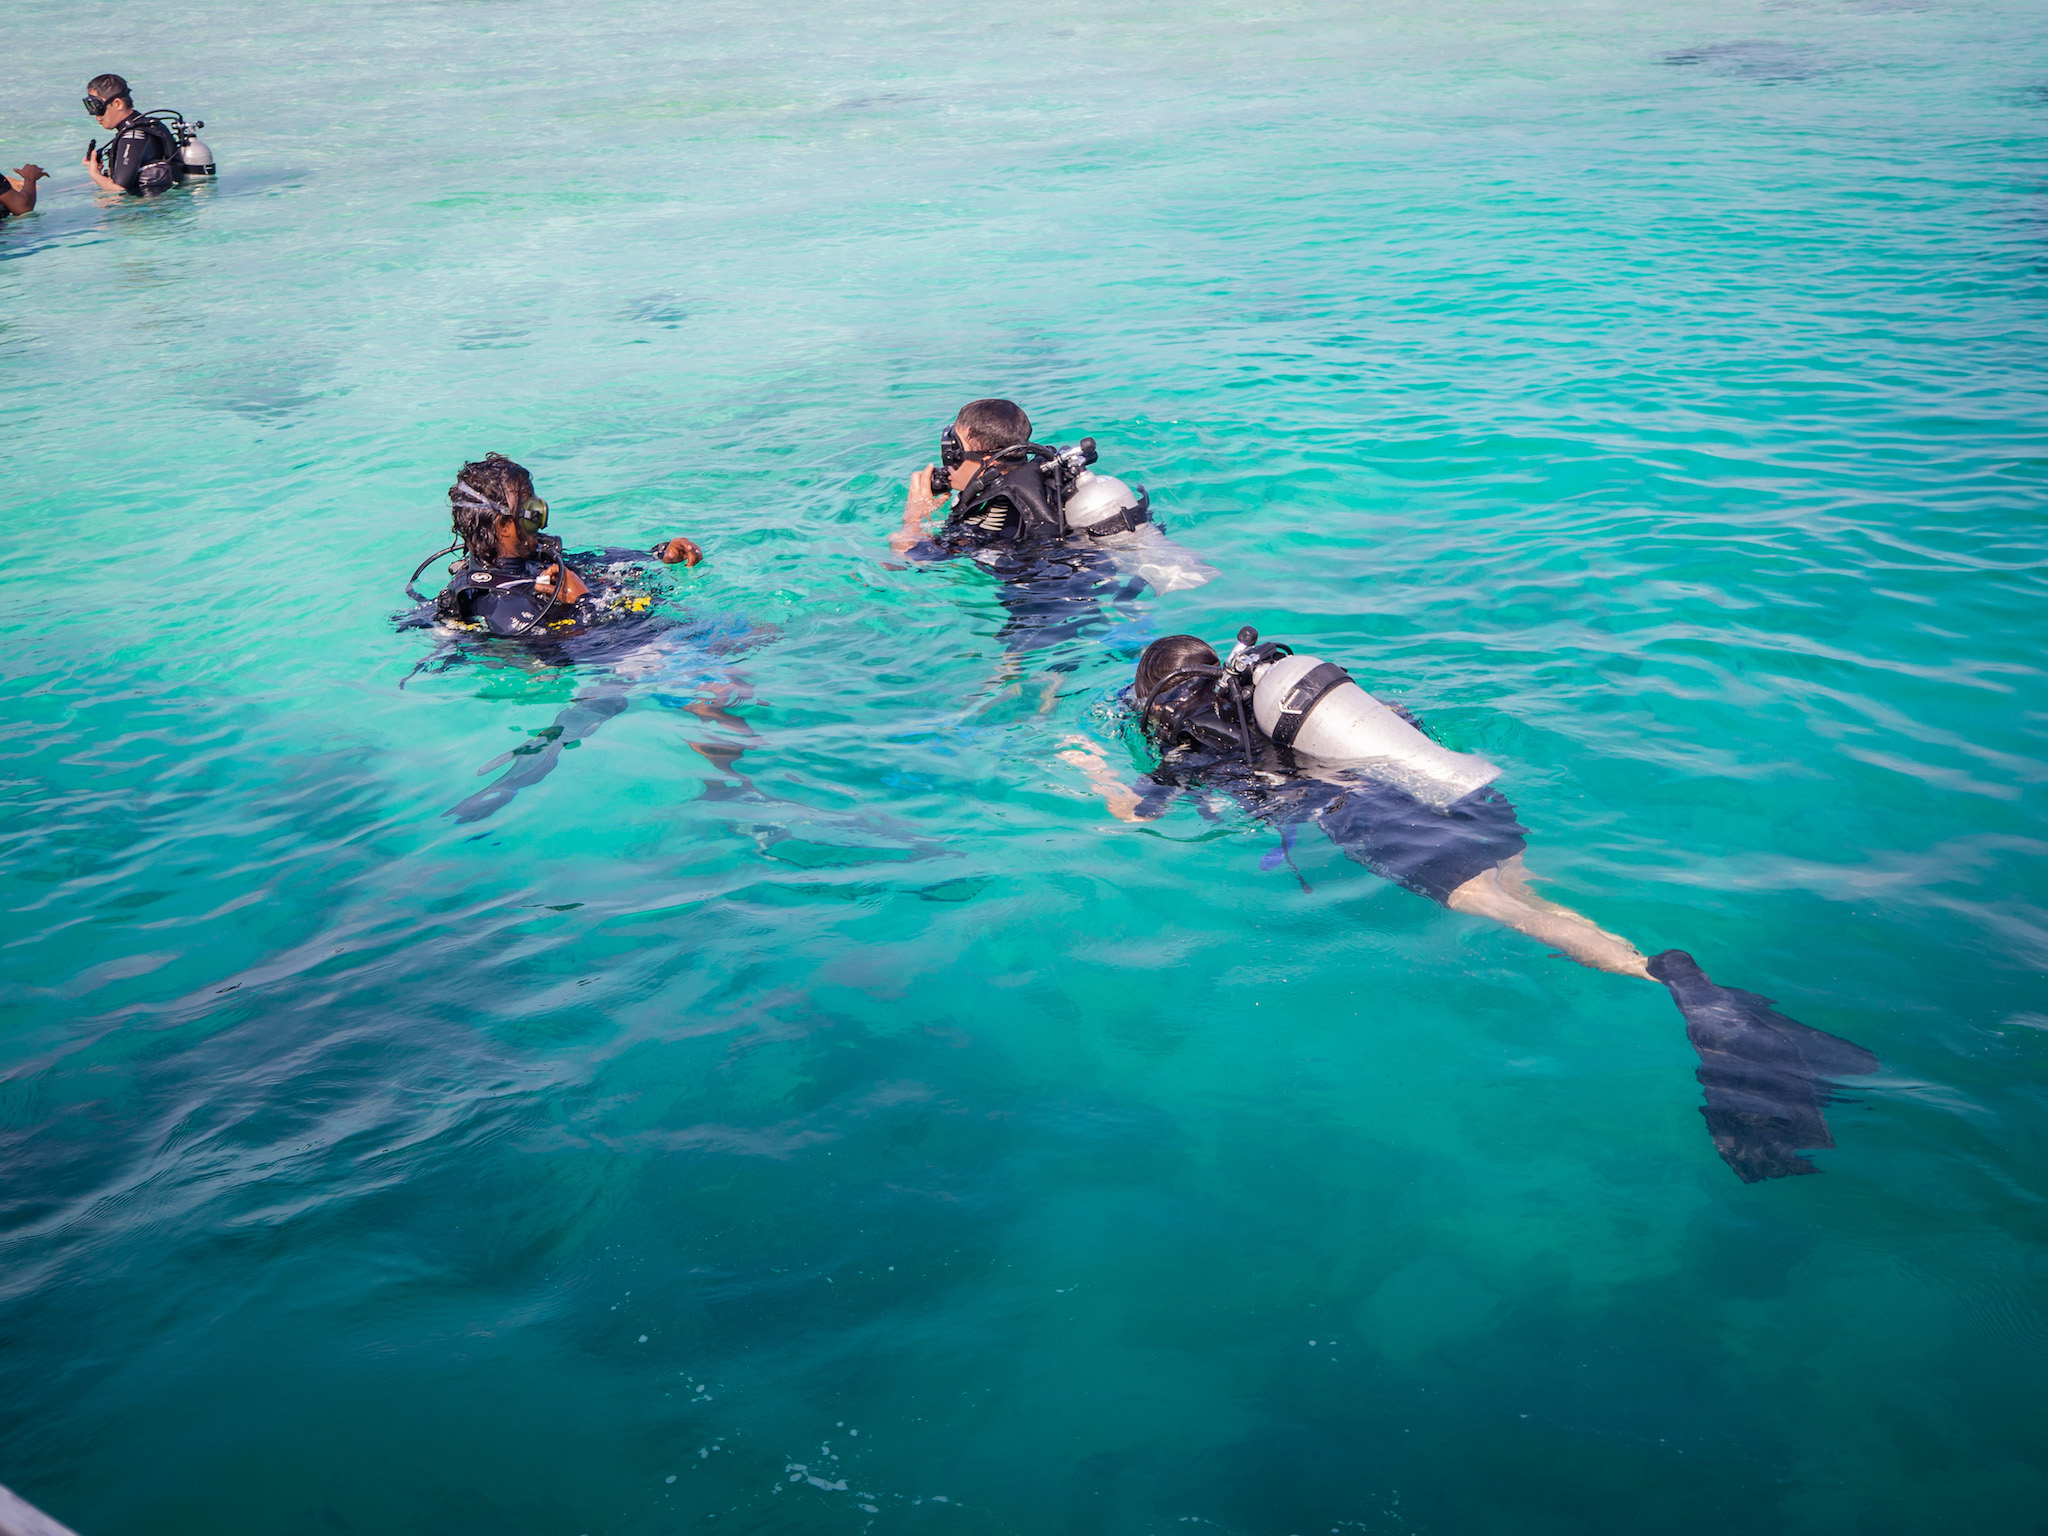 Diving in the Maldives